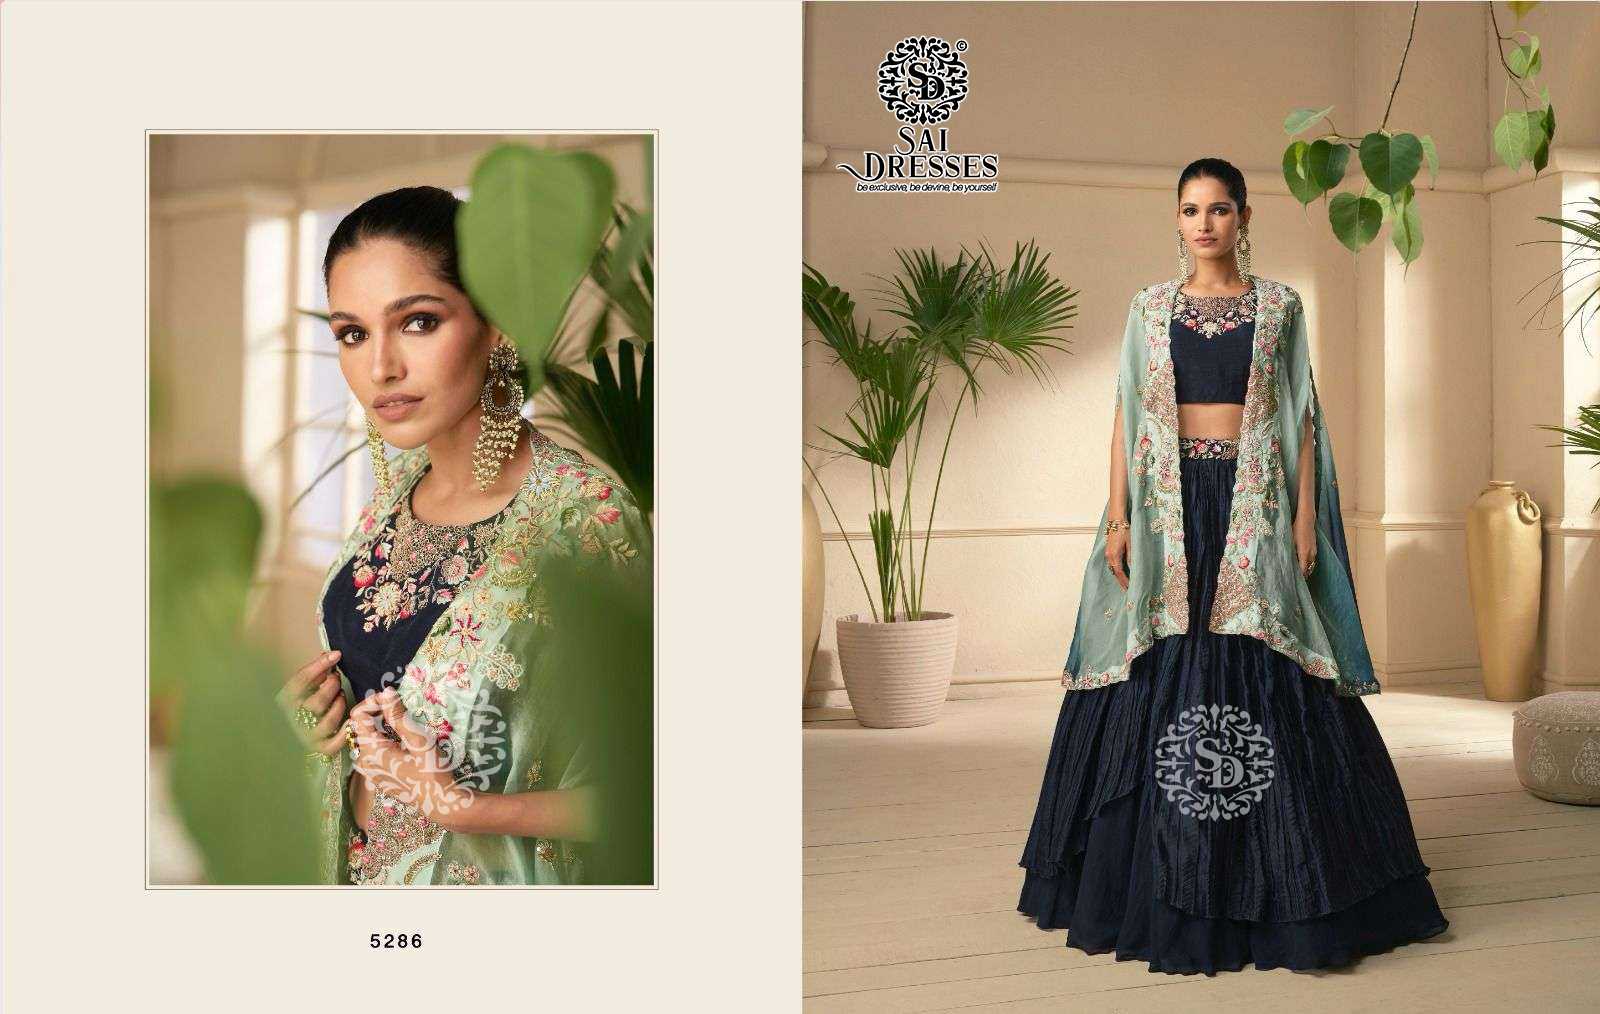 SAI DRESSES PRESENT VASANSI READYMADE PARTY WEAR BEAUTIFUL DESIGNER COLLECTION IN WHOLESALE RATE IN SURAT